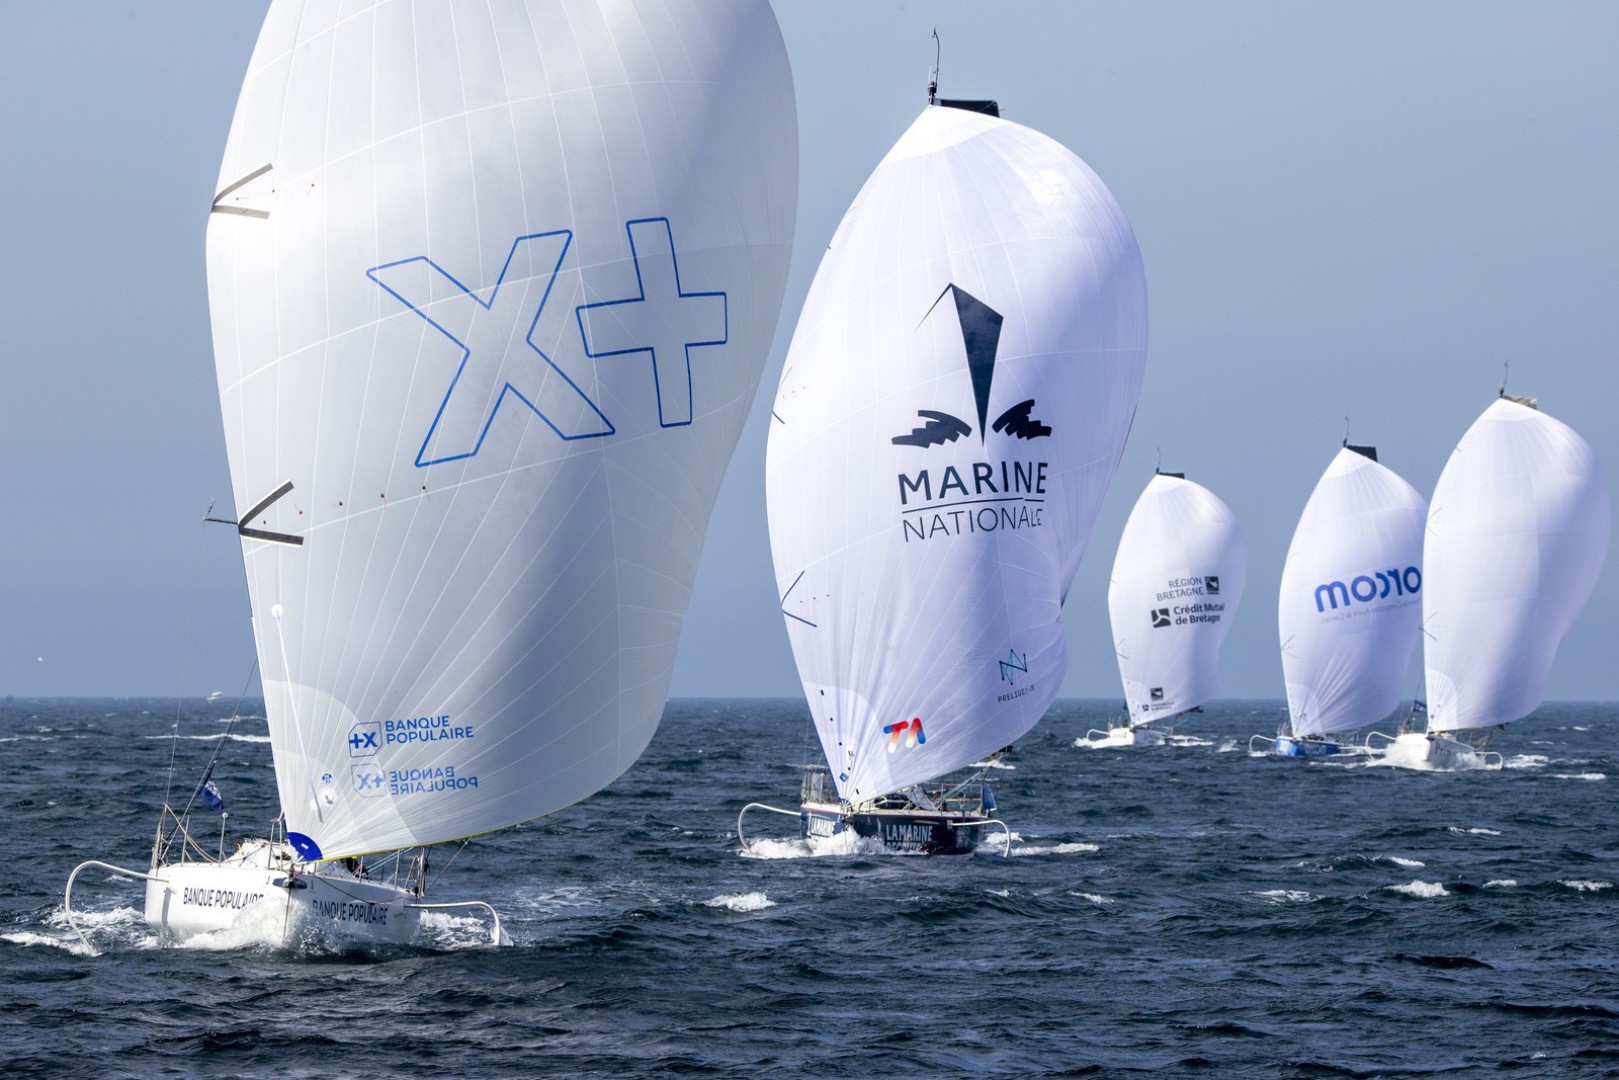 CORENTIN HOREAU (BANQUE POPULAIRE) LEADS OUT OF THE BAY OF MORLAIX UNDER SPINNAKER  

Photo ©Alexis Courcoux